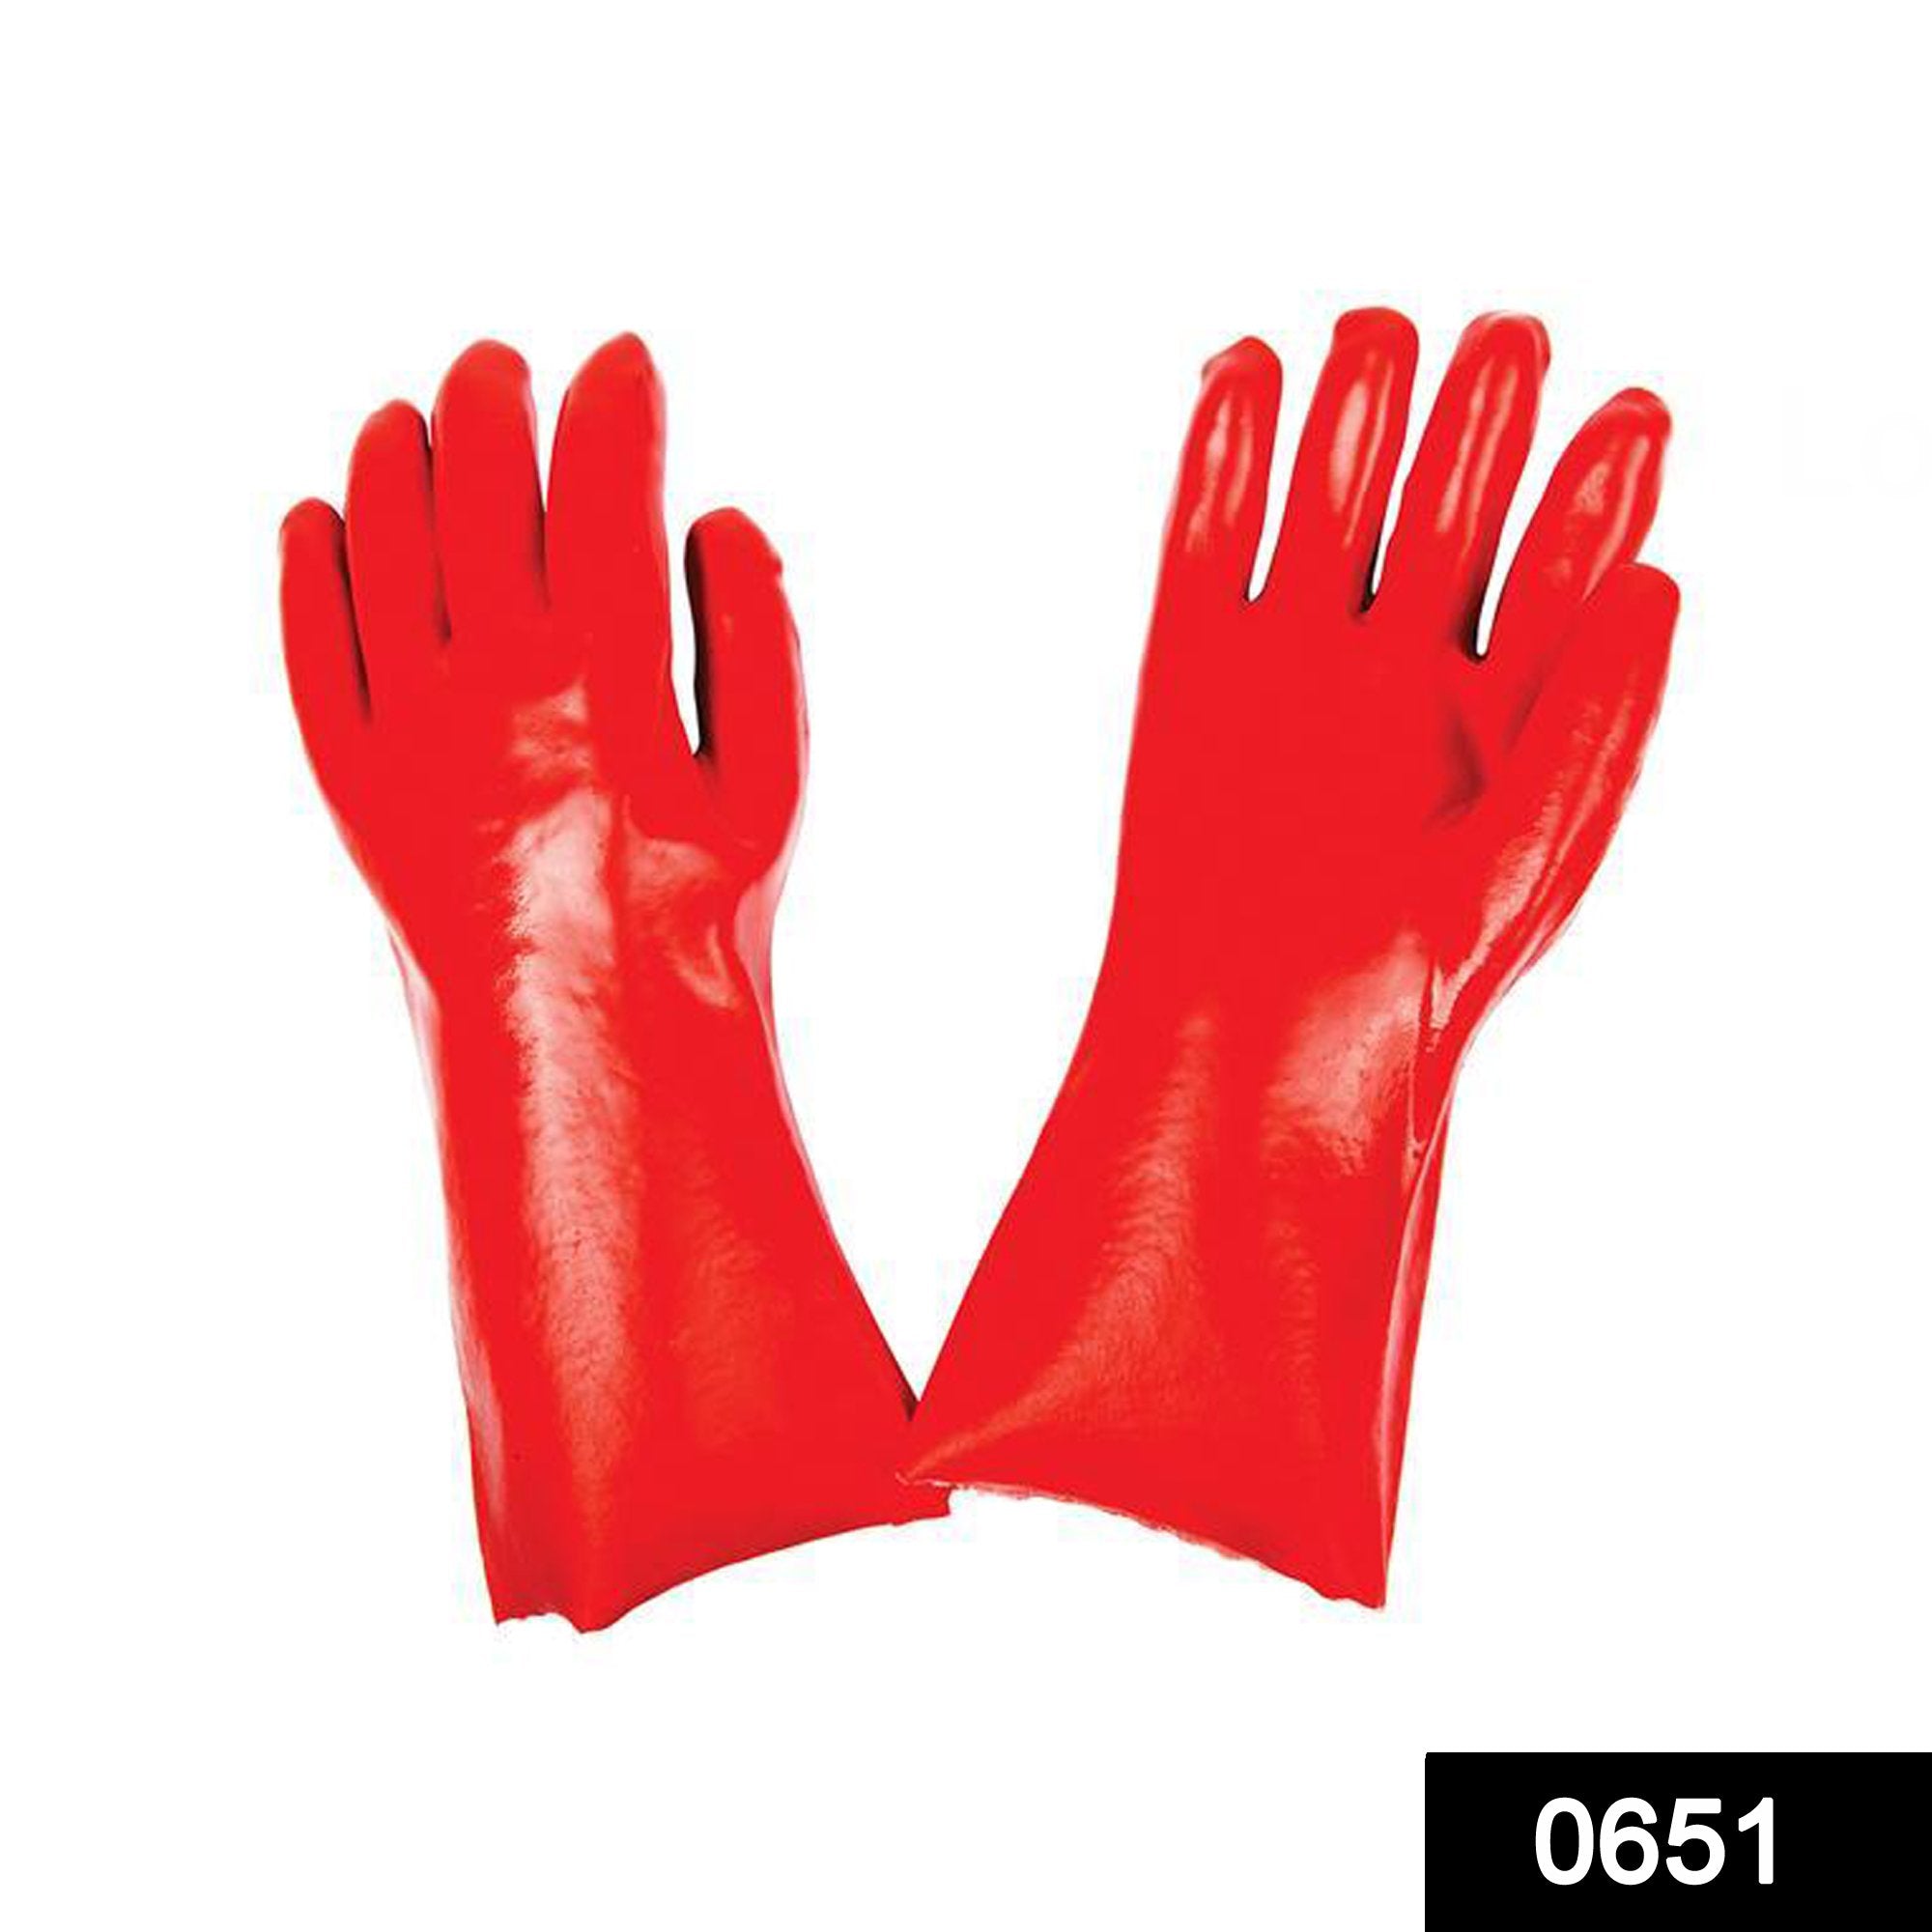 0651 - Cut Glove Reusable Rubber Hand Gloves (Red) - 1 pc - SkyShopy